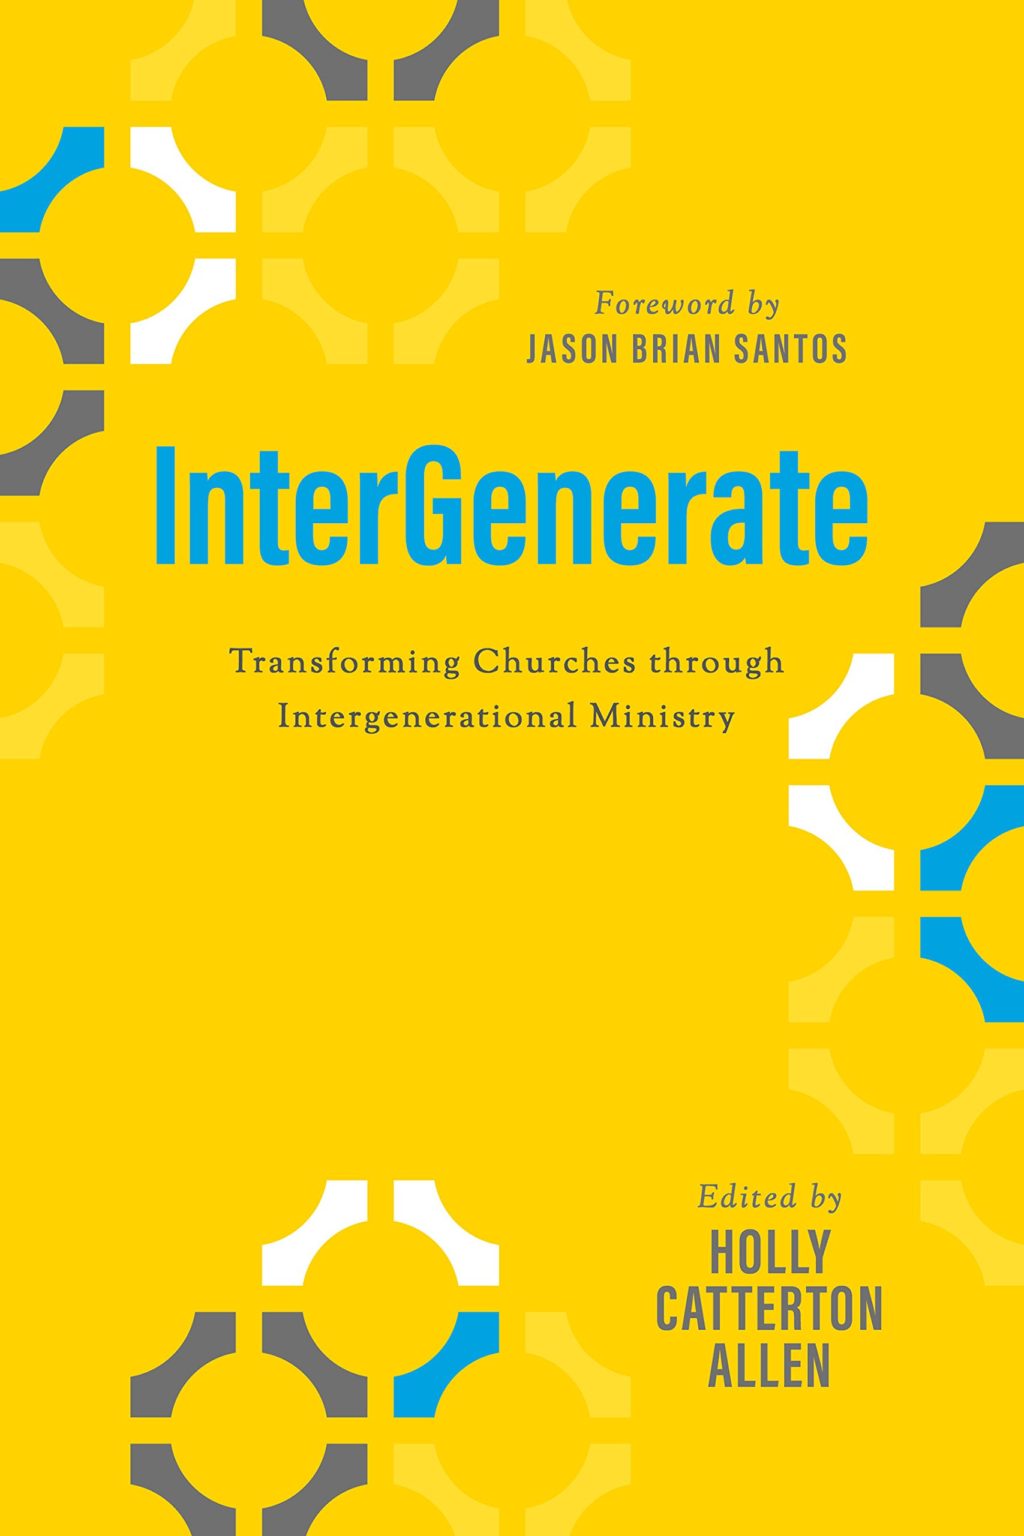 Intergenerate Book Review